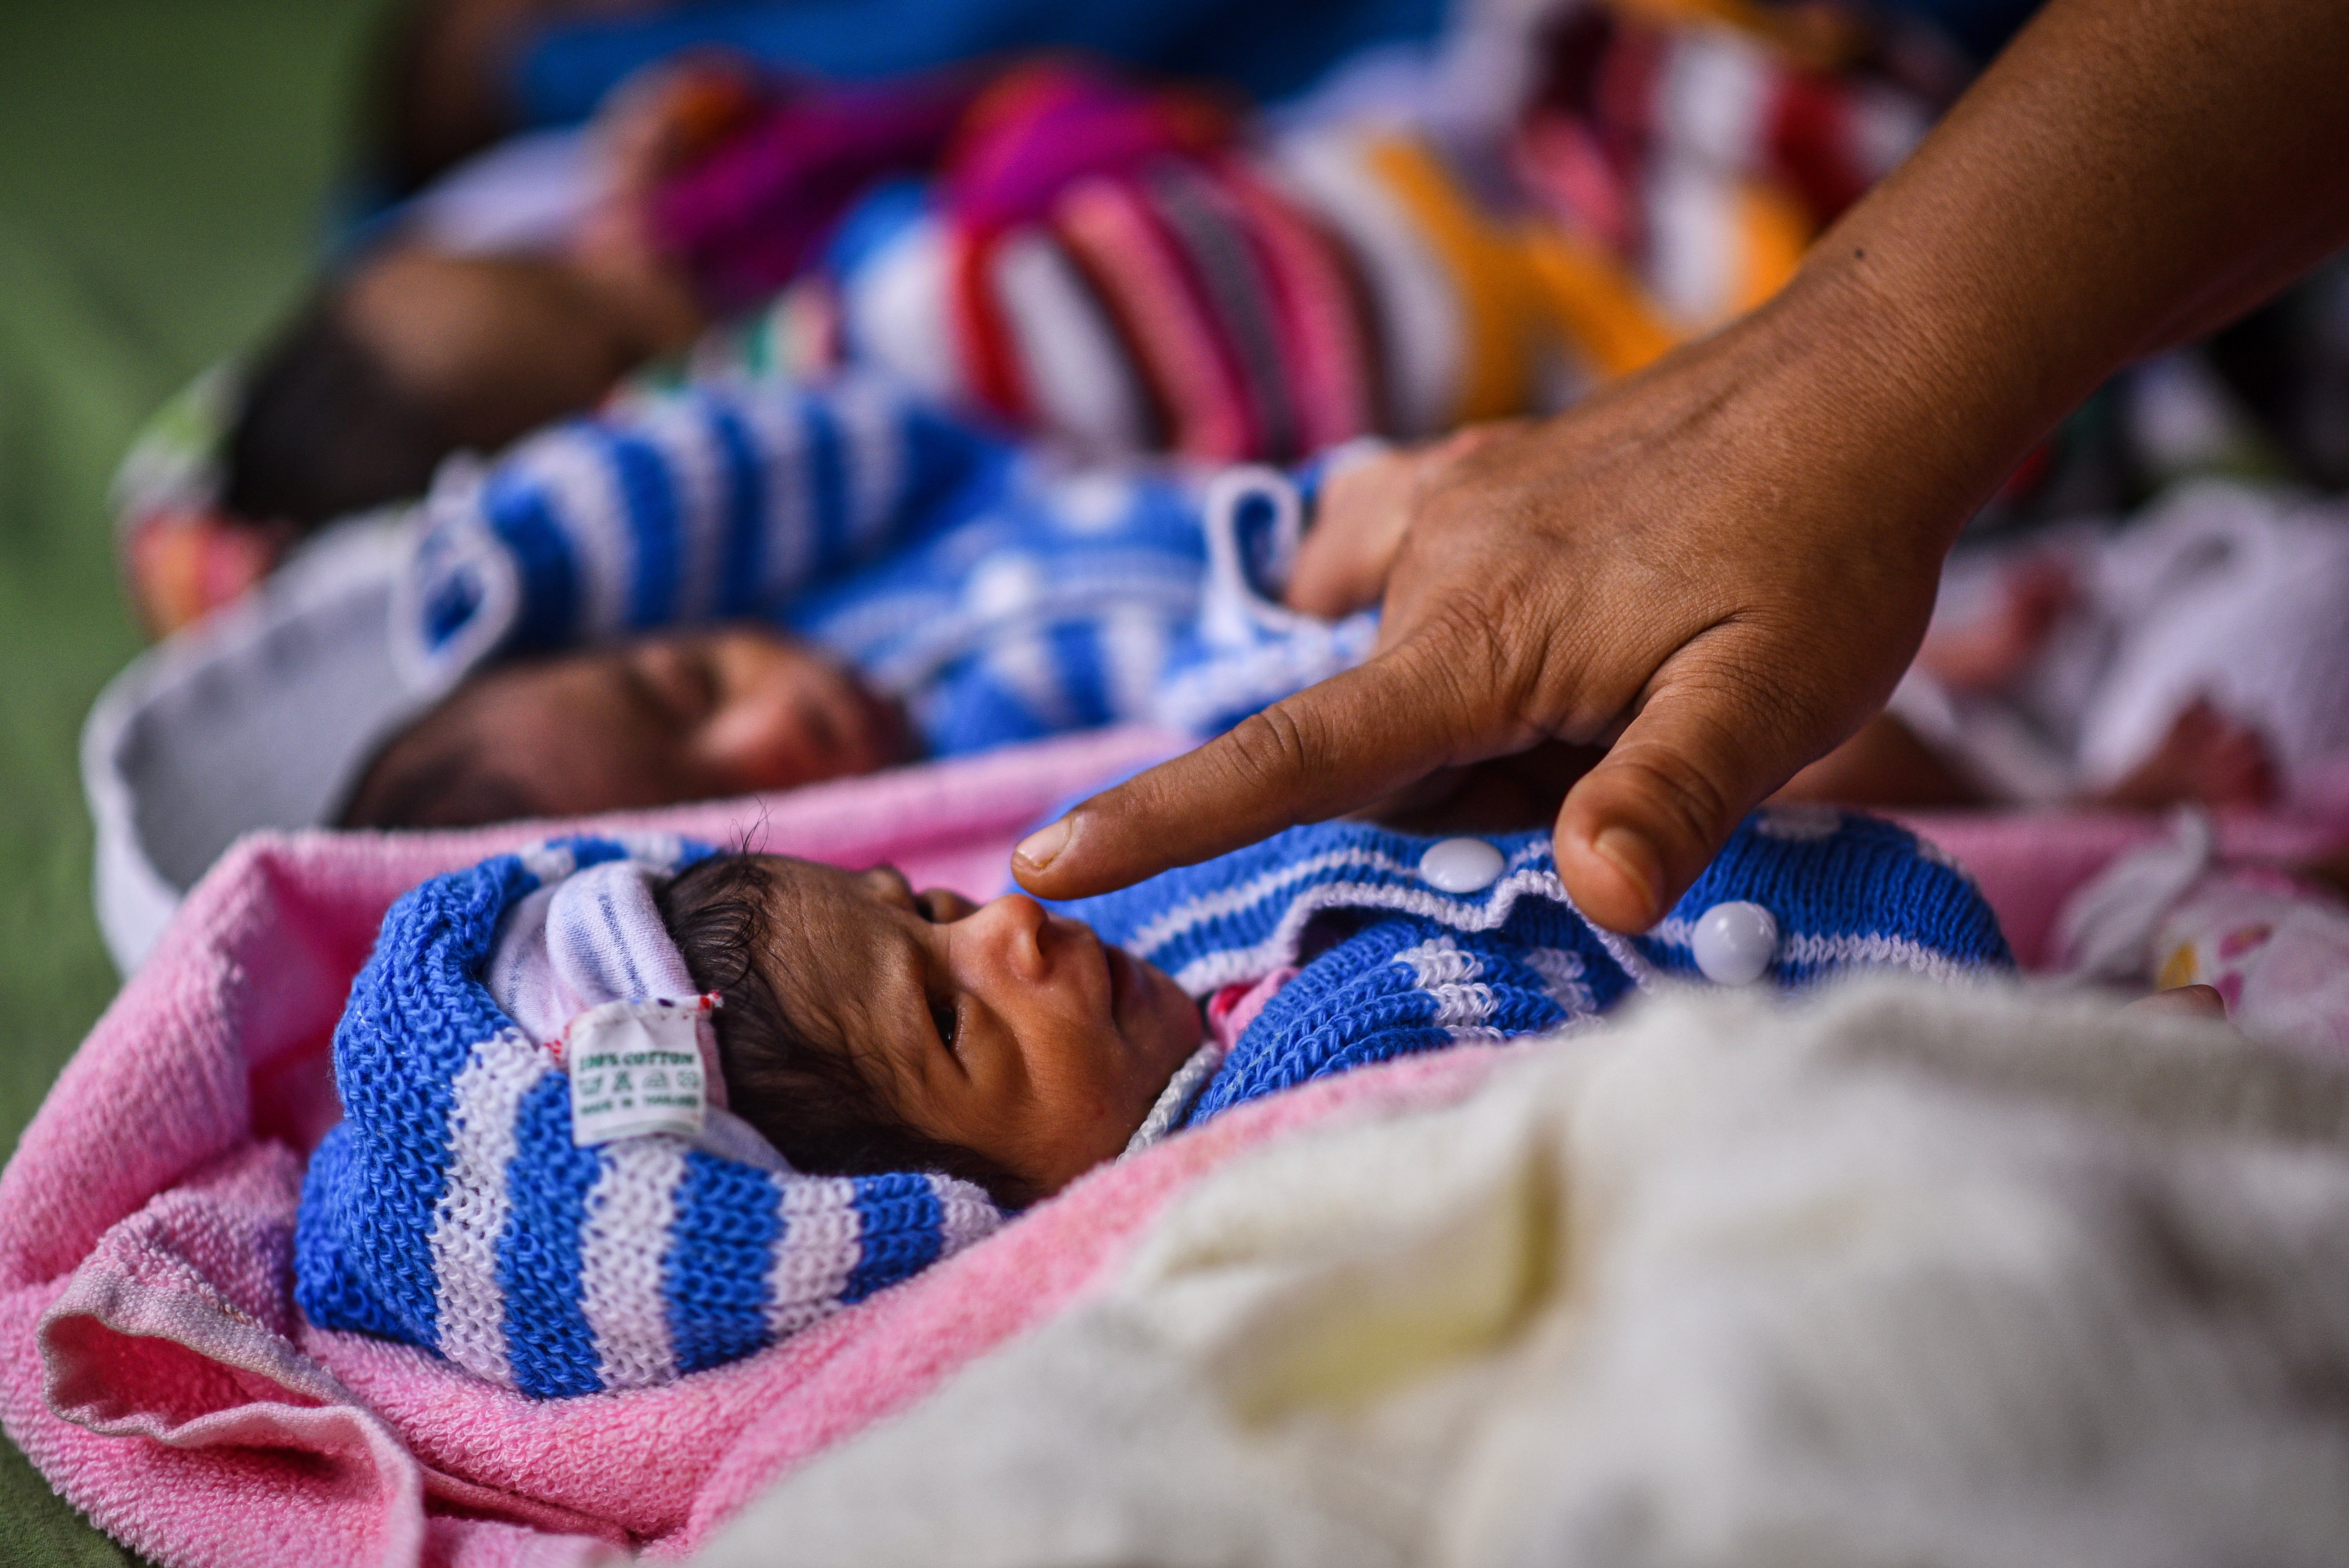 Newborn babies rest inside a government maternity hospital in Chennai, India